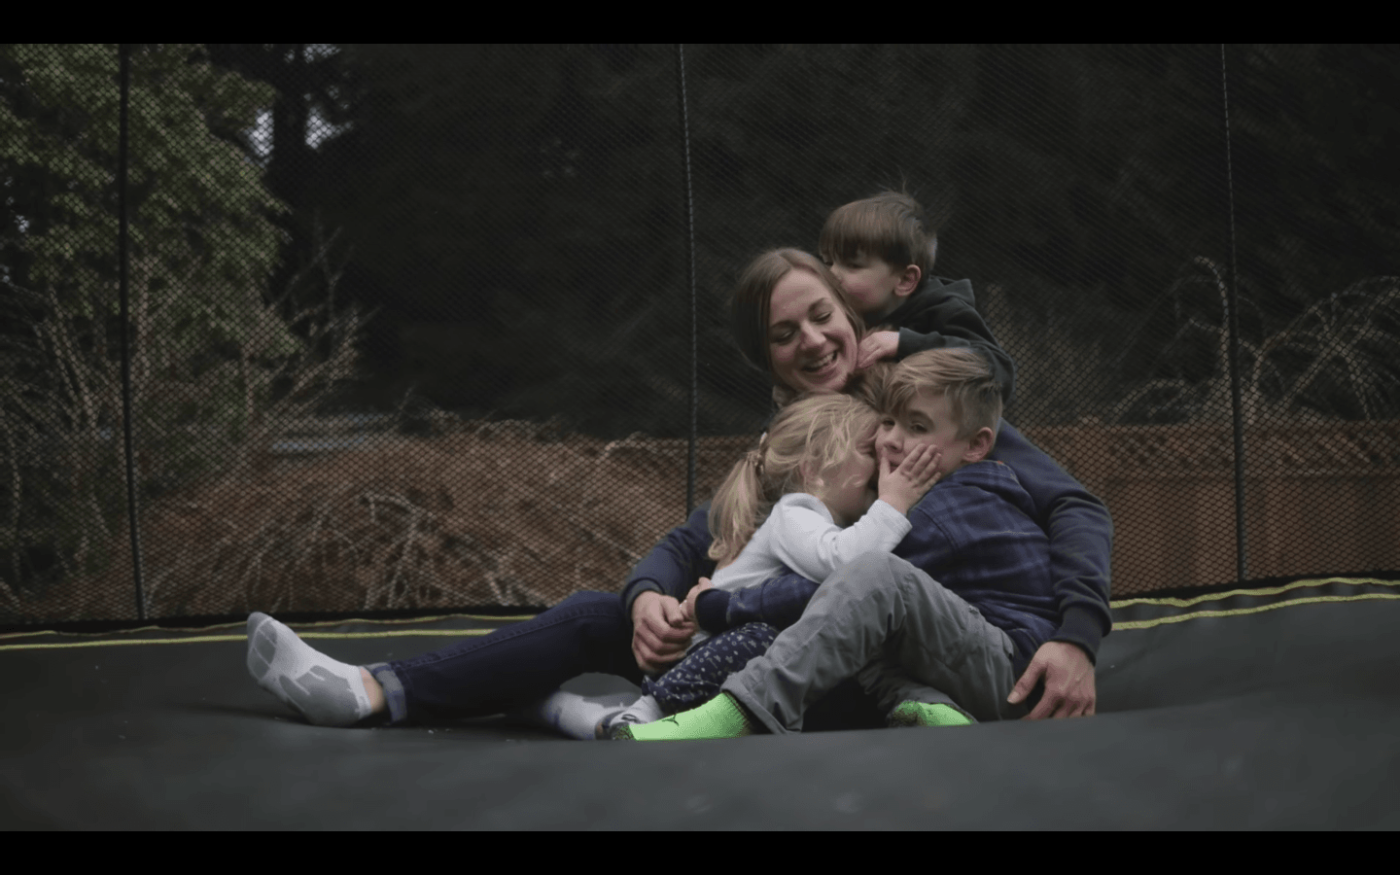 A woman sitting on a trampoline smiling widely with three toddlers climbing all over her and kissing her.